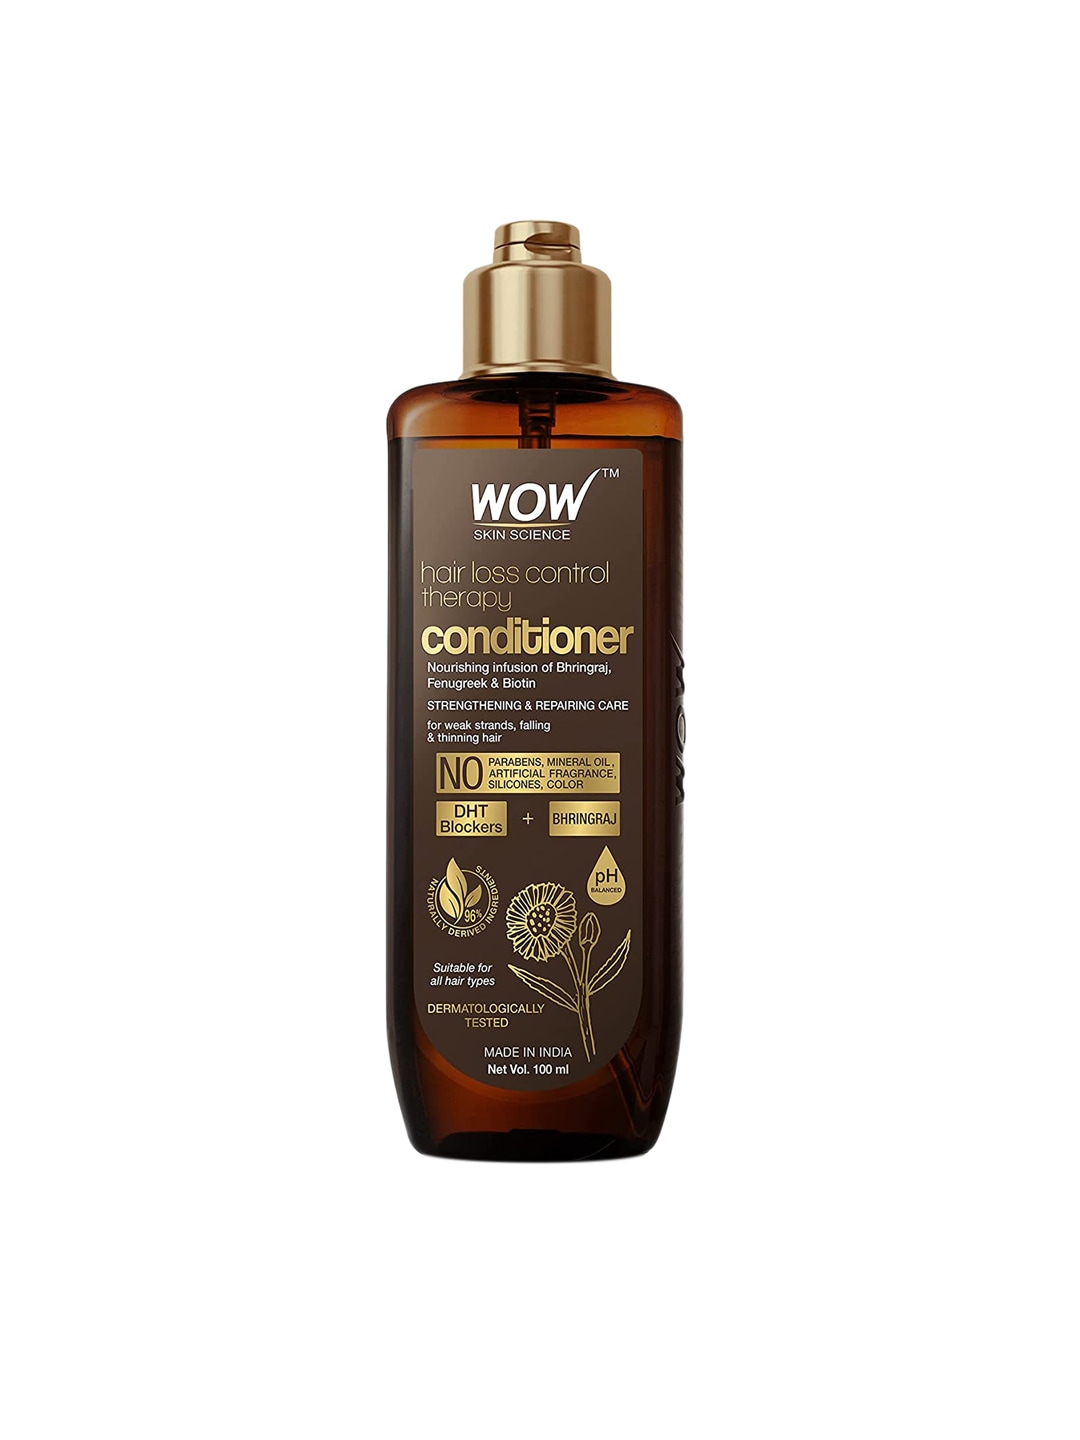 WOW SKIN SCIENCE Hair Loss Control Therapy Conditioner - 100ml Price in India